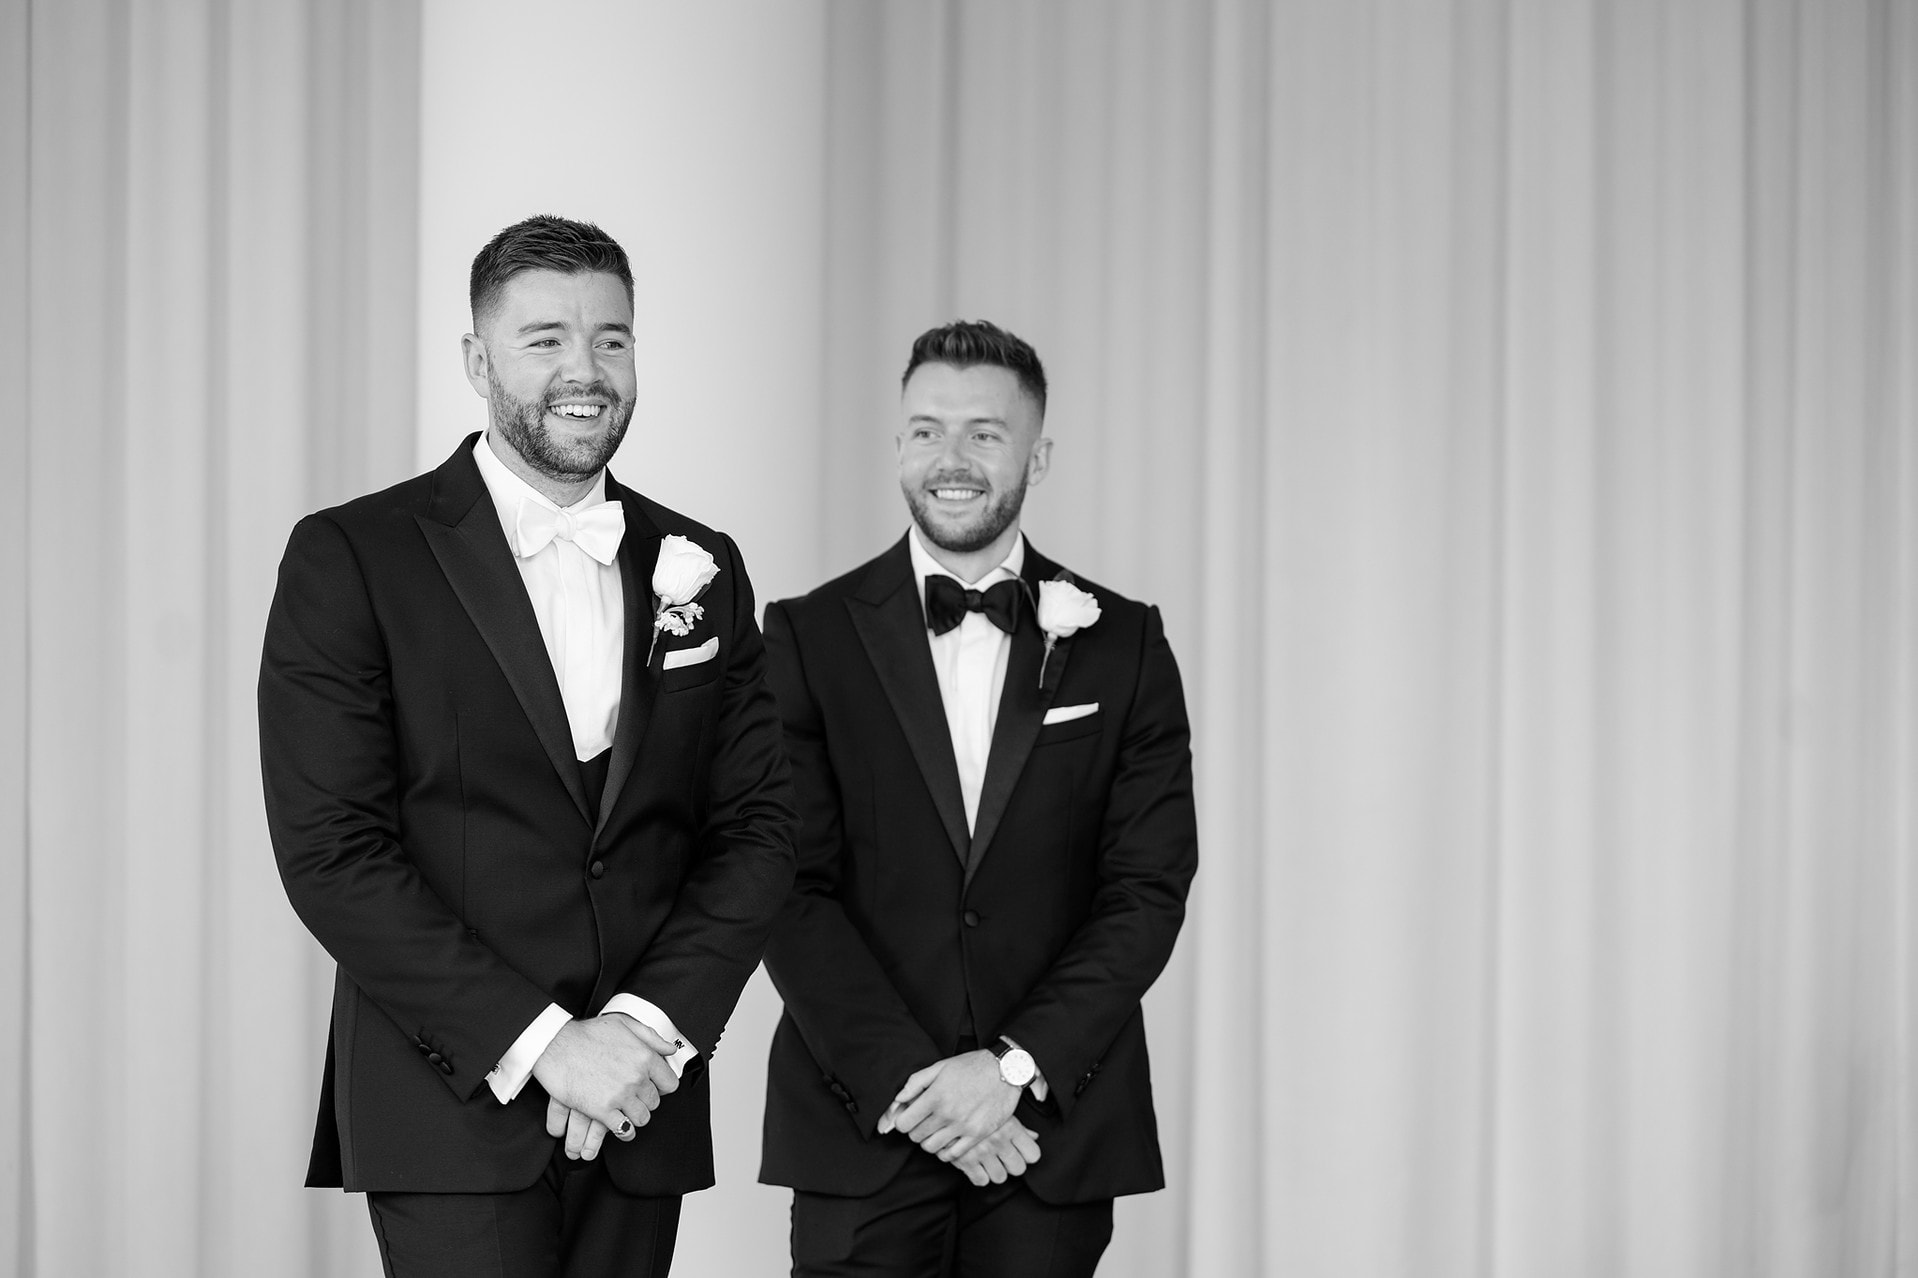 Groom and best man standing ready for the ceremony to start